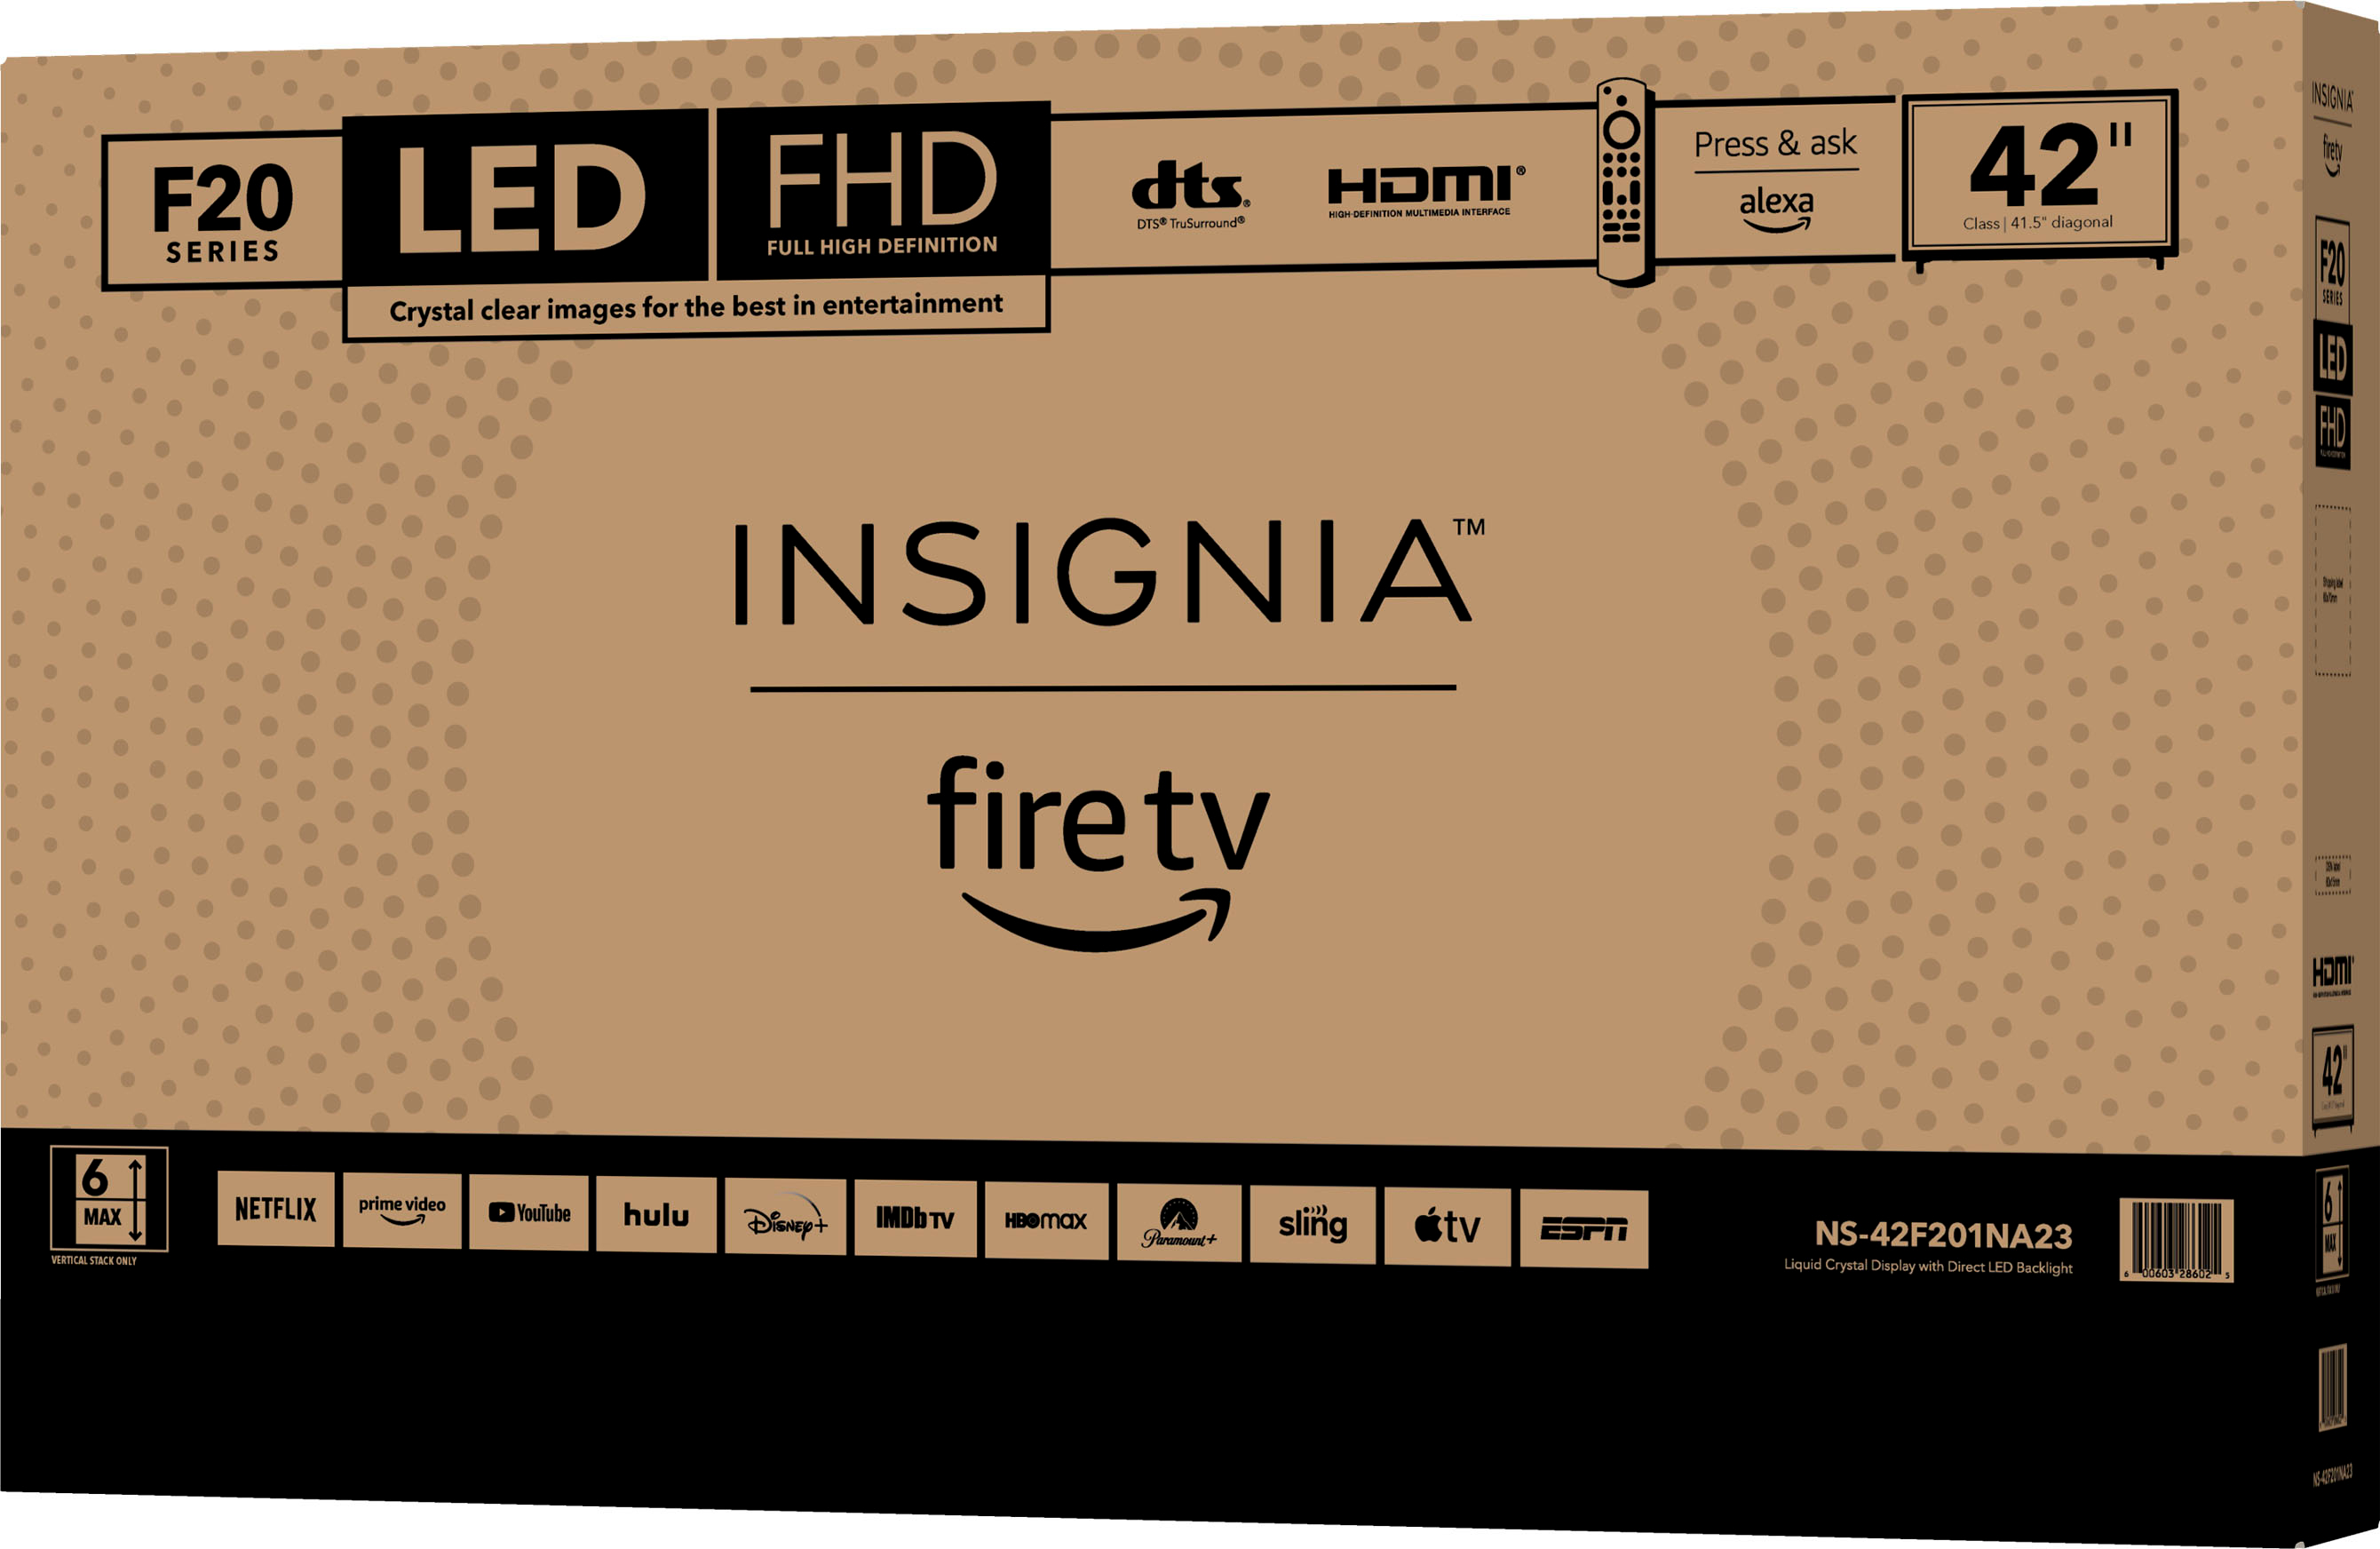 Best Buy: Insignia™ Connected TV 42 Class LED 1080p 120Hz Smart HDTV Multi  NS-42E859A11